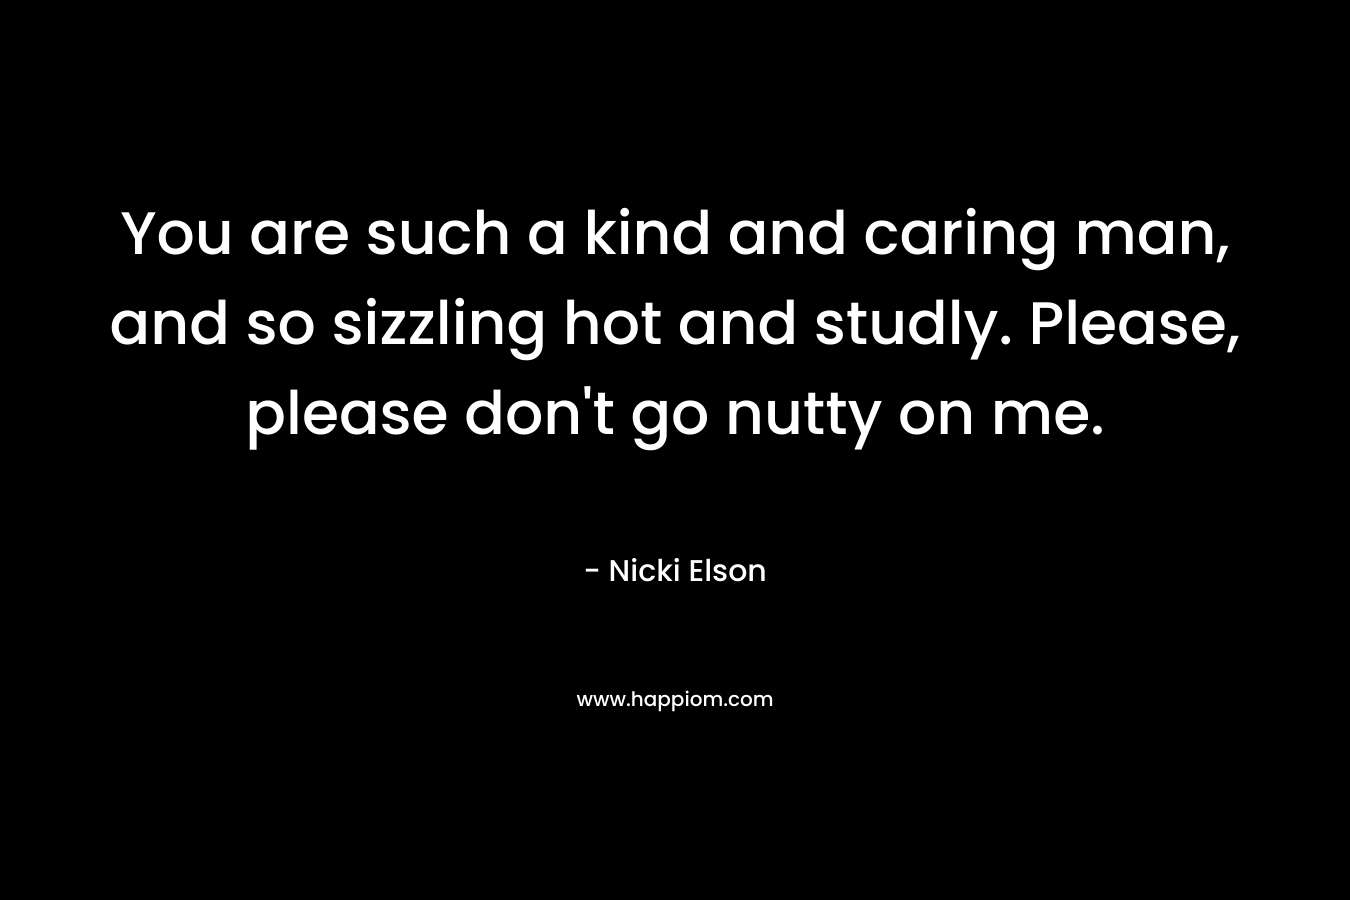 You are such a kind and caring man, and so sizzling hot and studly. Please, please don’t go nutty on me. – Nicki Elson